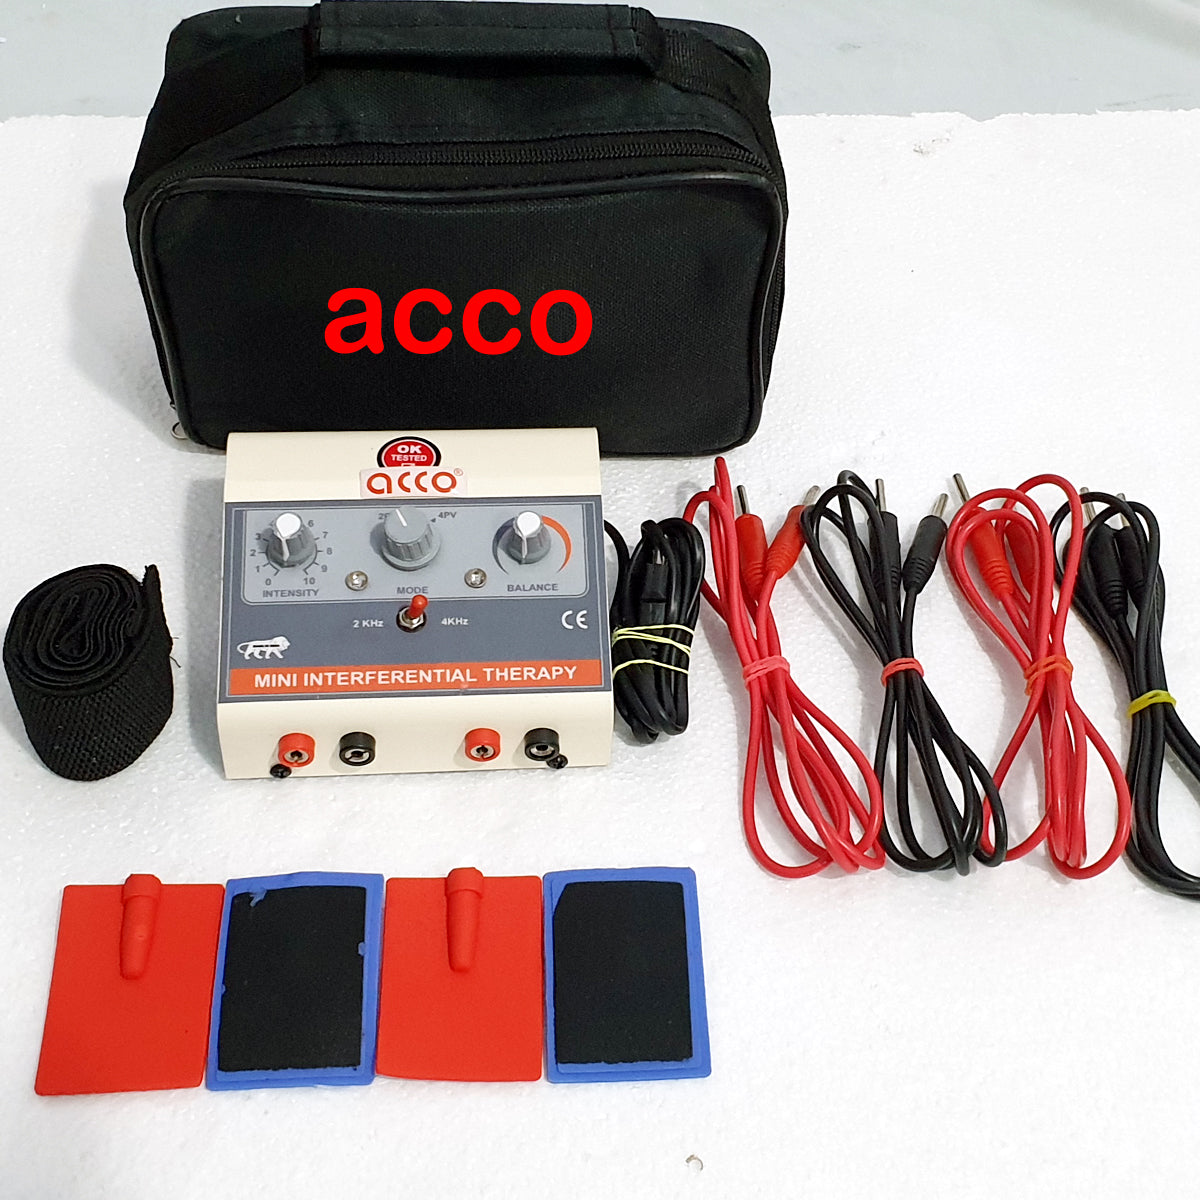 acco Physiotherapy Mini Interferential Therapy Machine